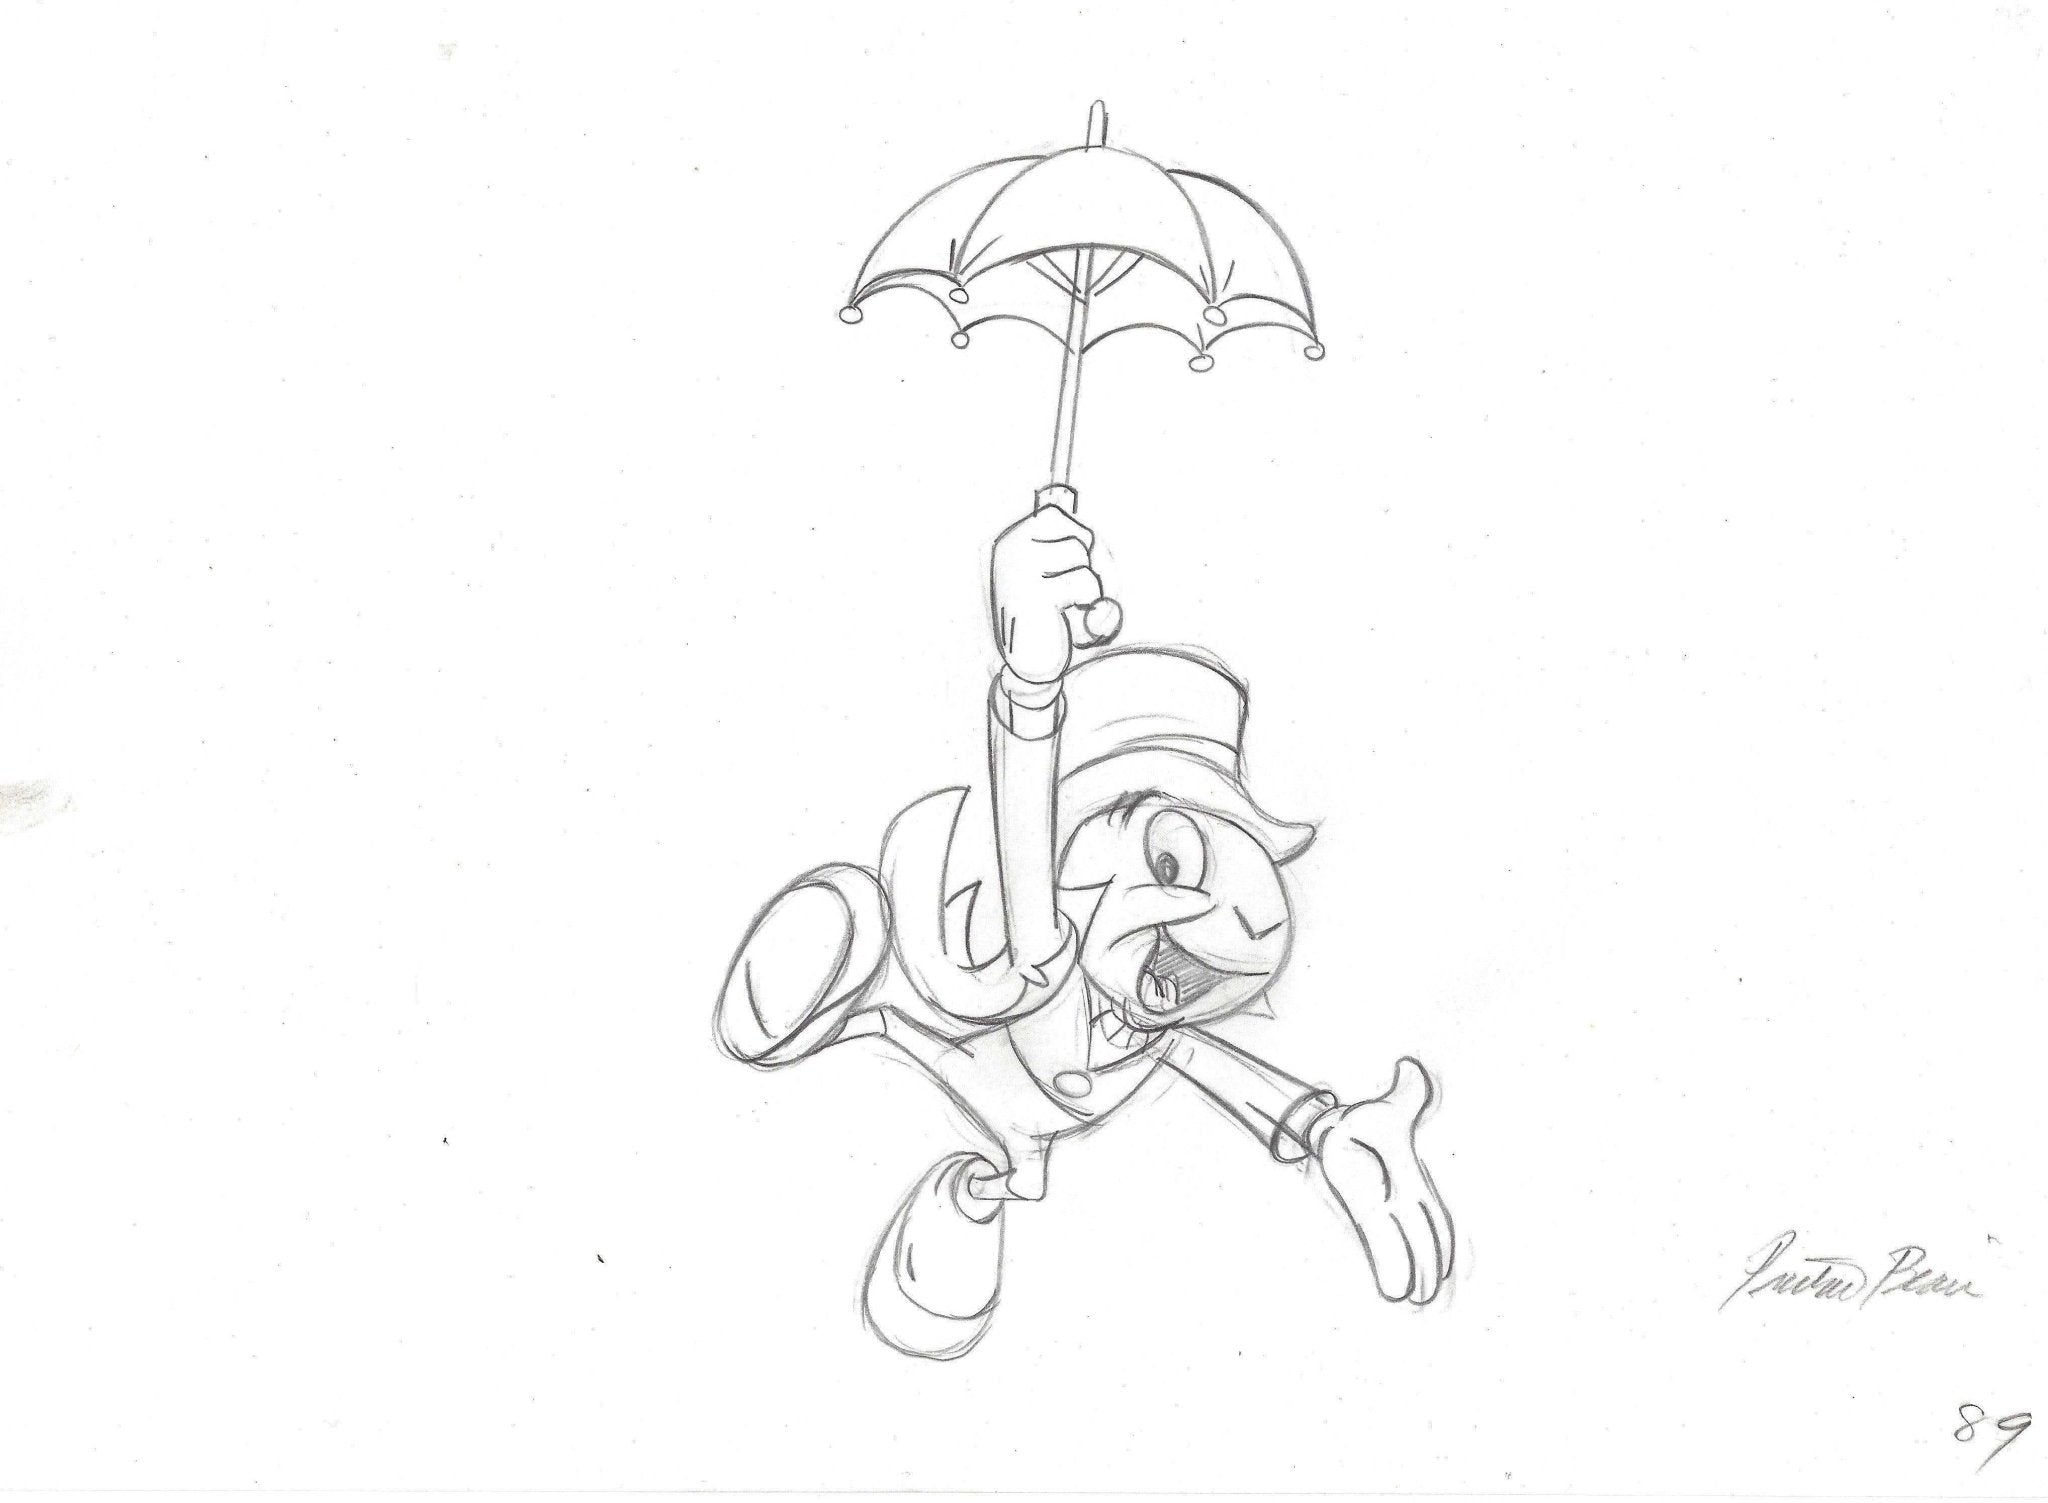 jiminy cricket coloring pages